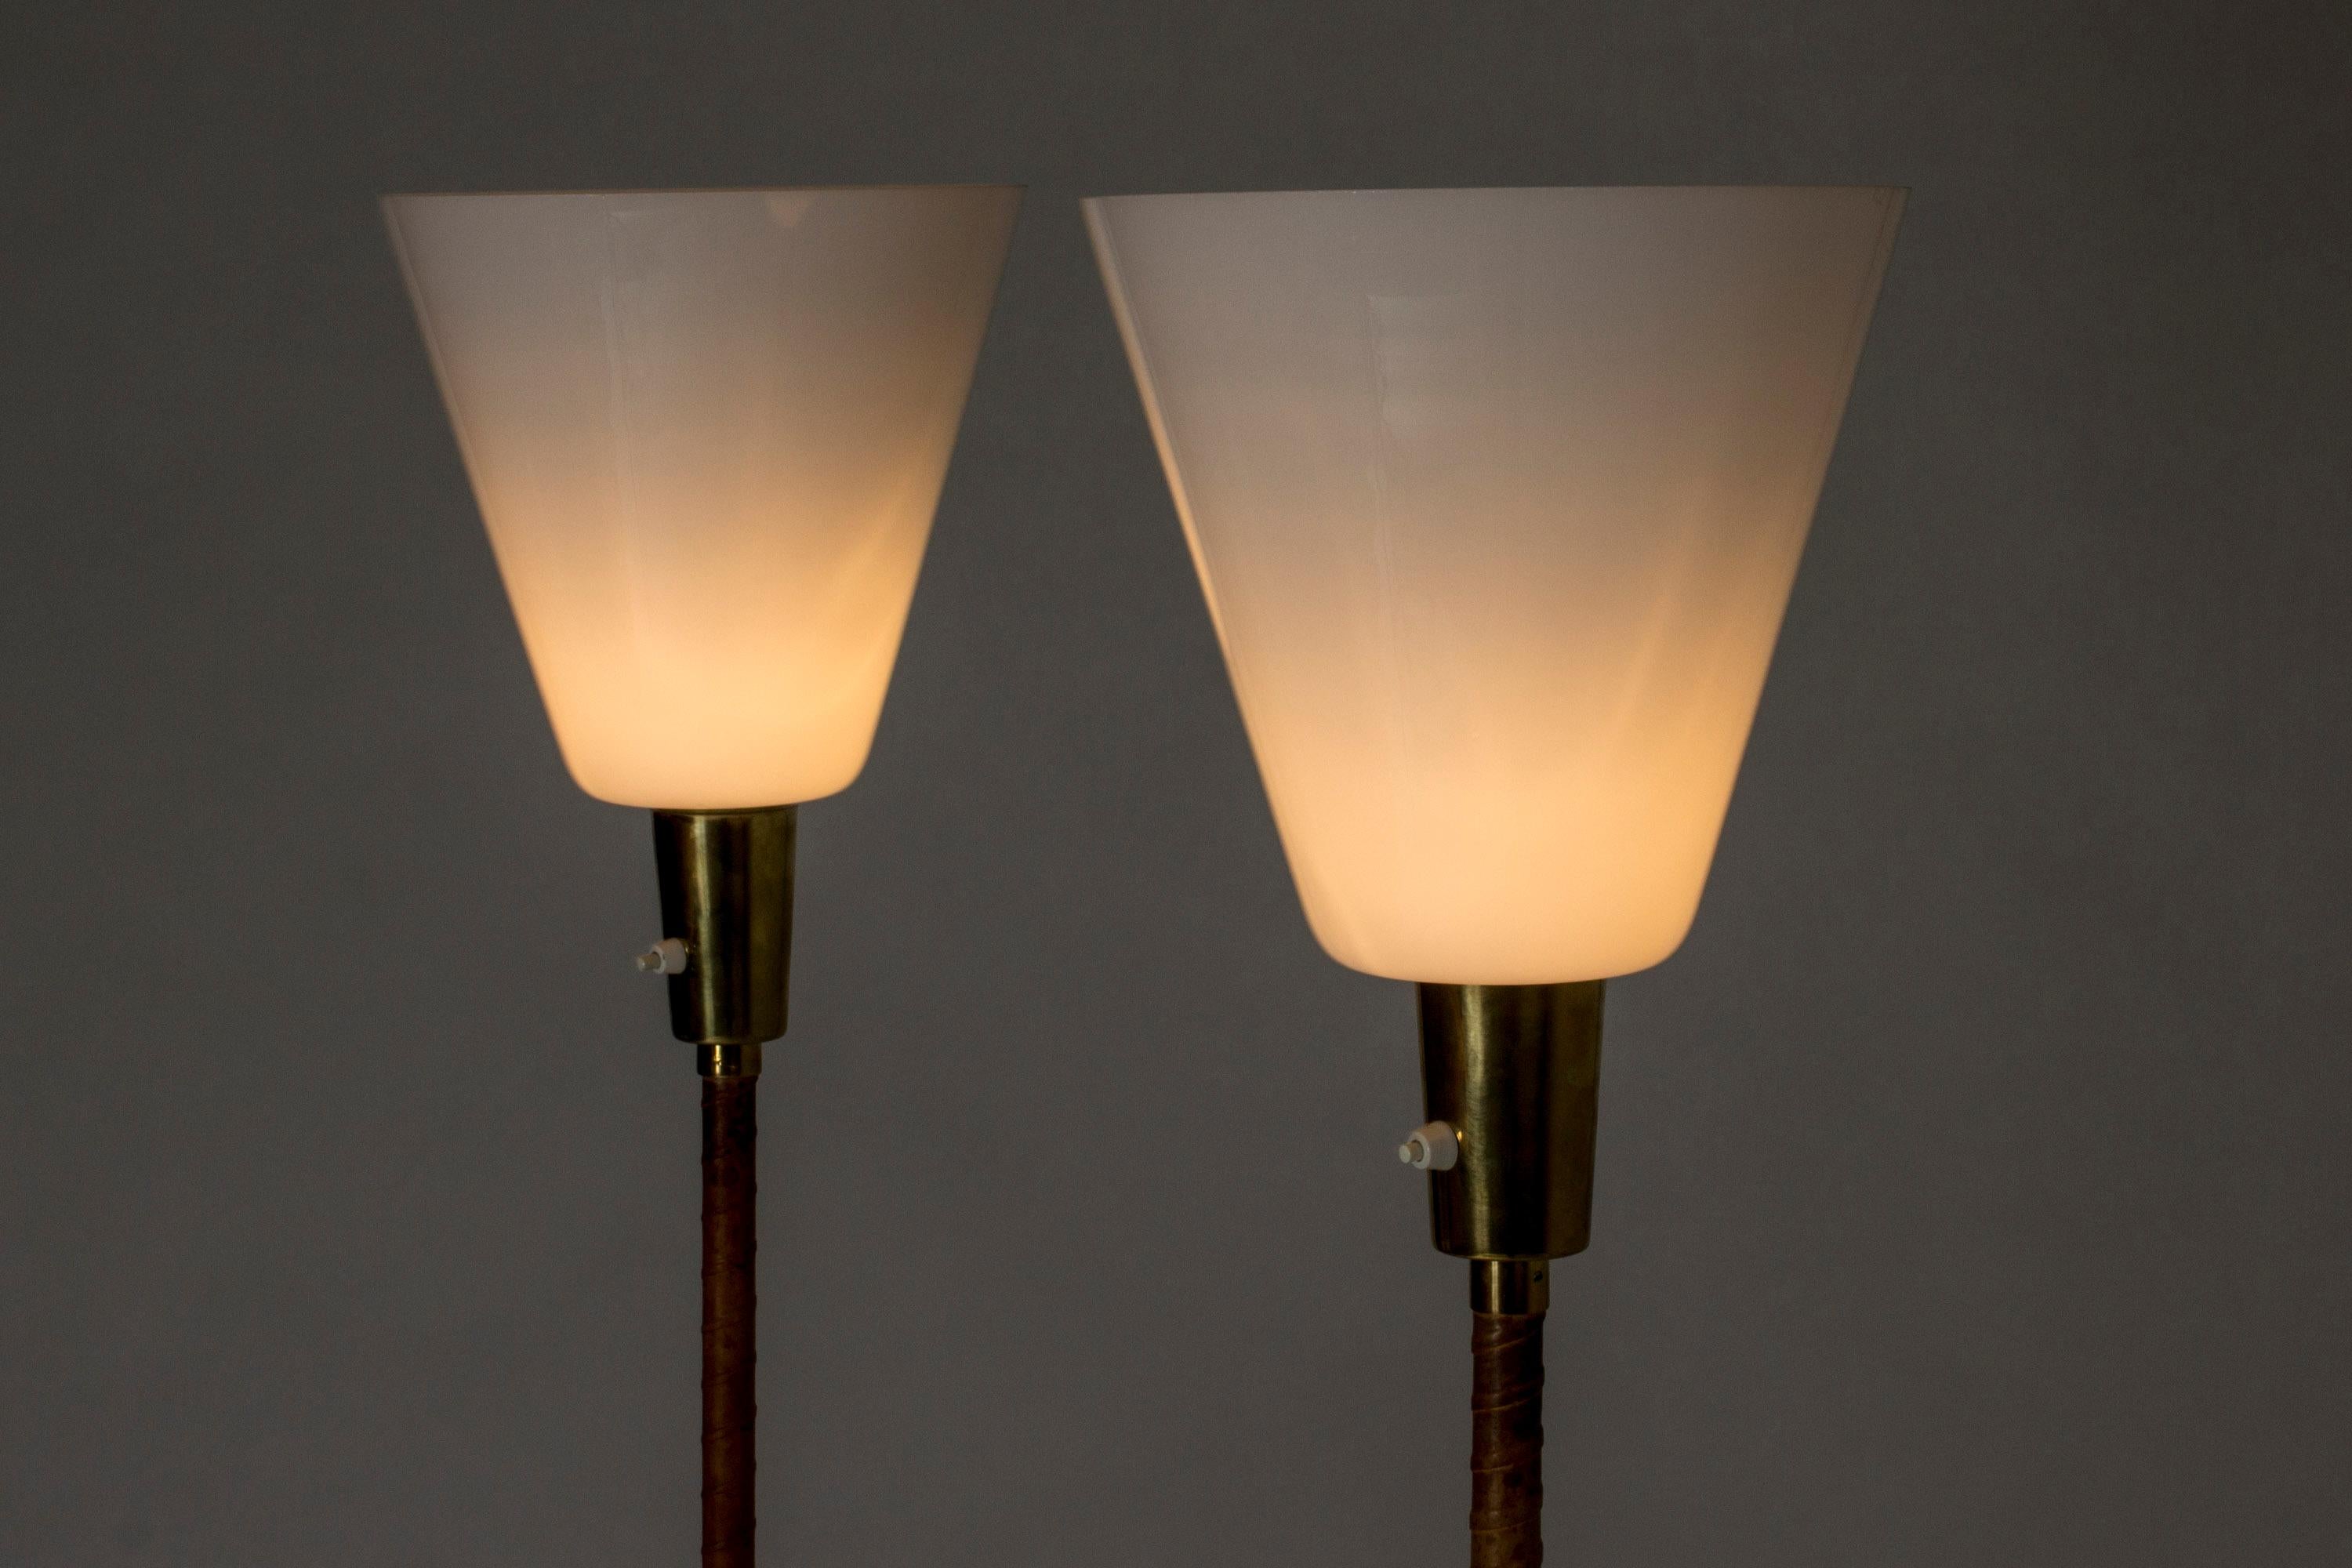 Pair of Floor Lamps by Lisa Johansson-Pape for Orno In Good Condition For Sale In Stockholm, SE